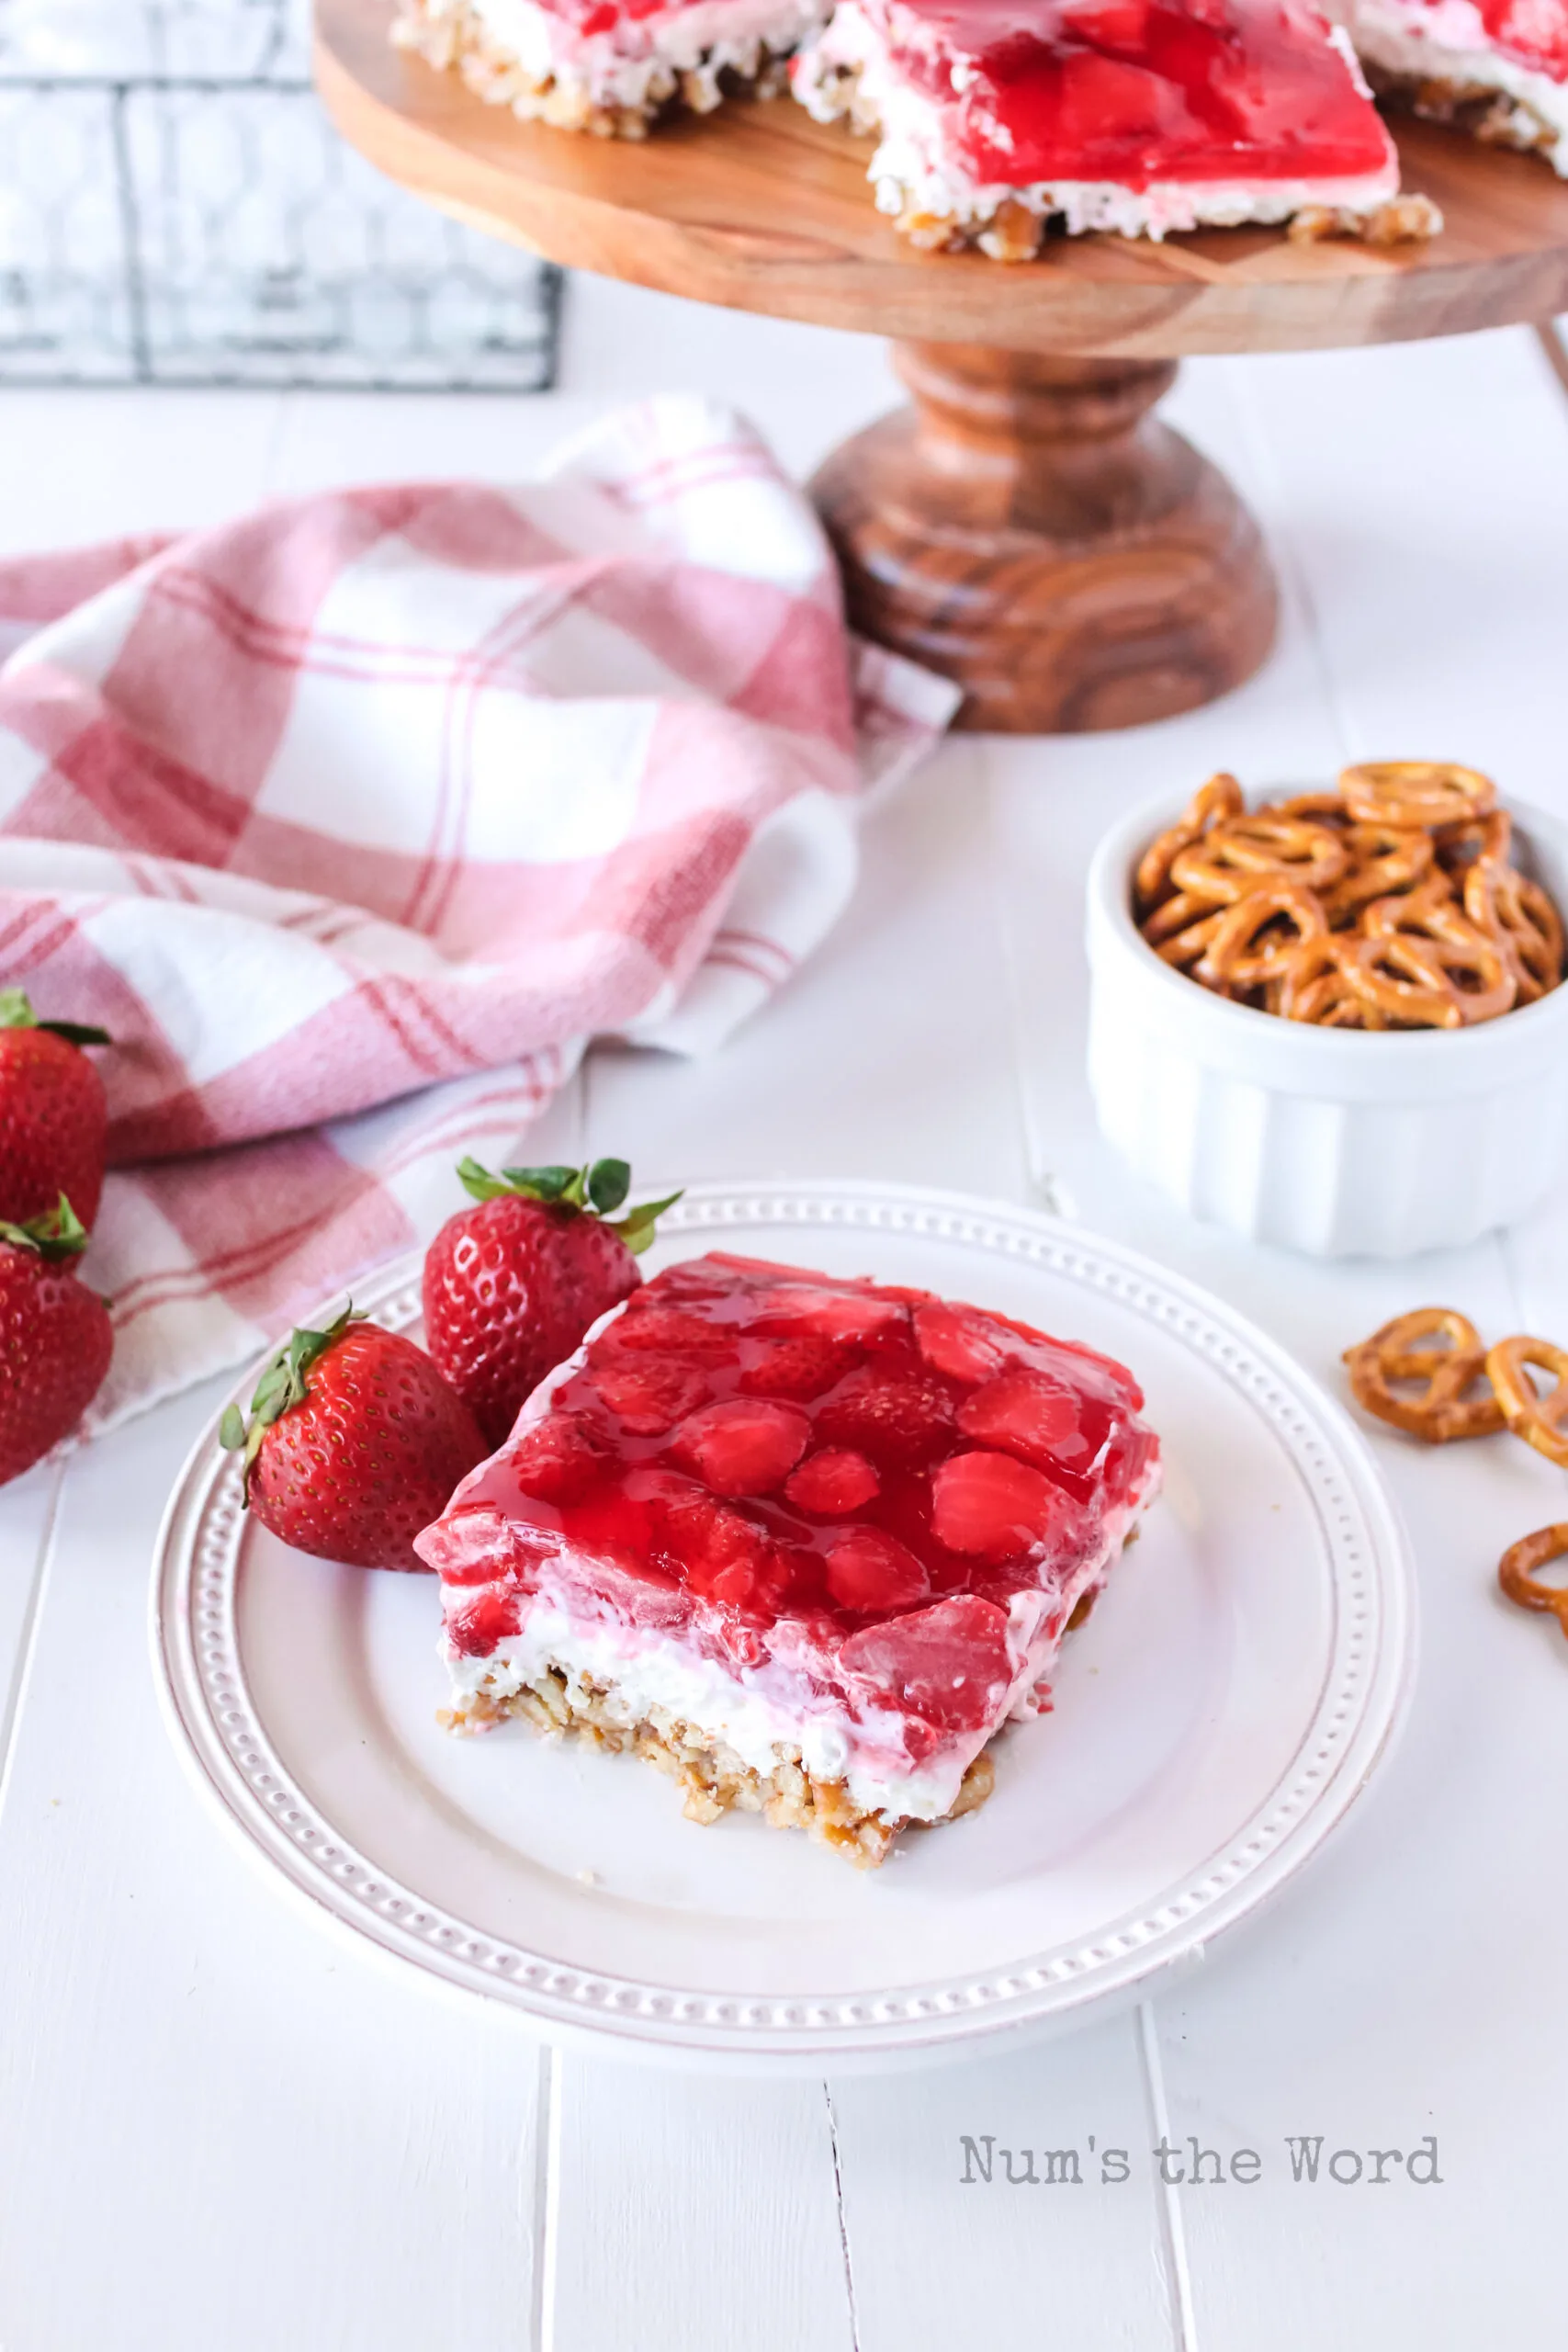 zoomed out image of a slice of strawberry pretzel salad on a plate.